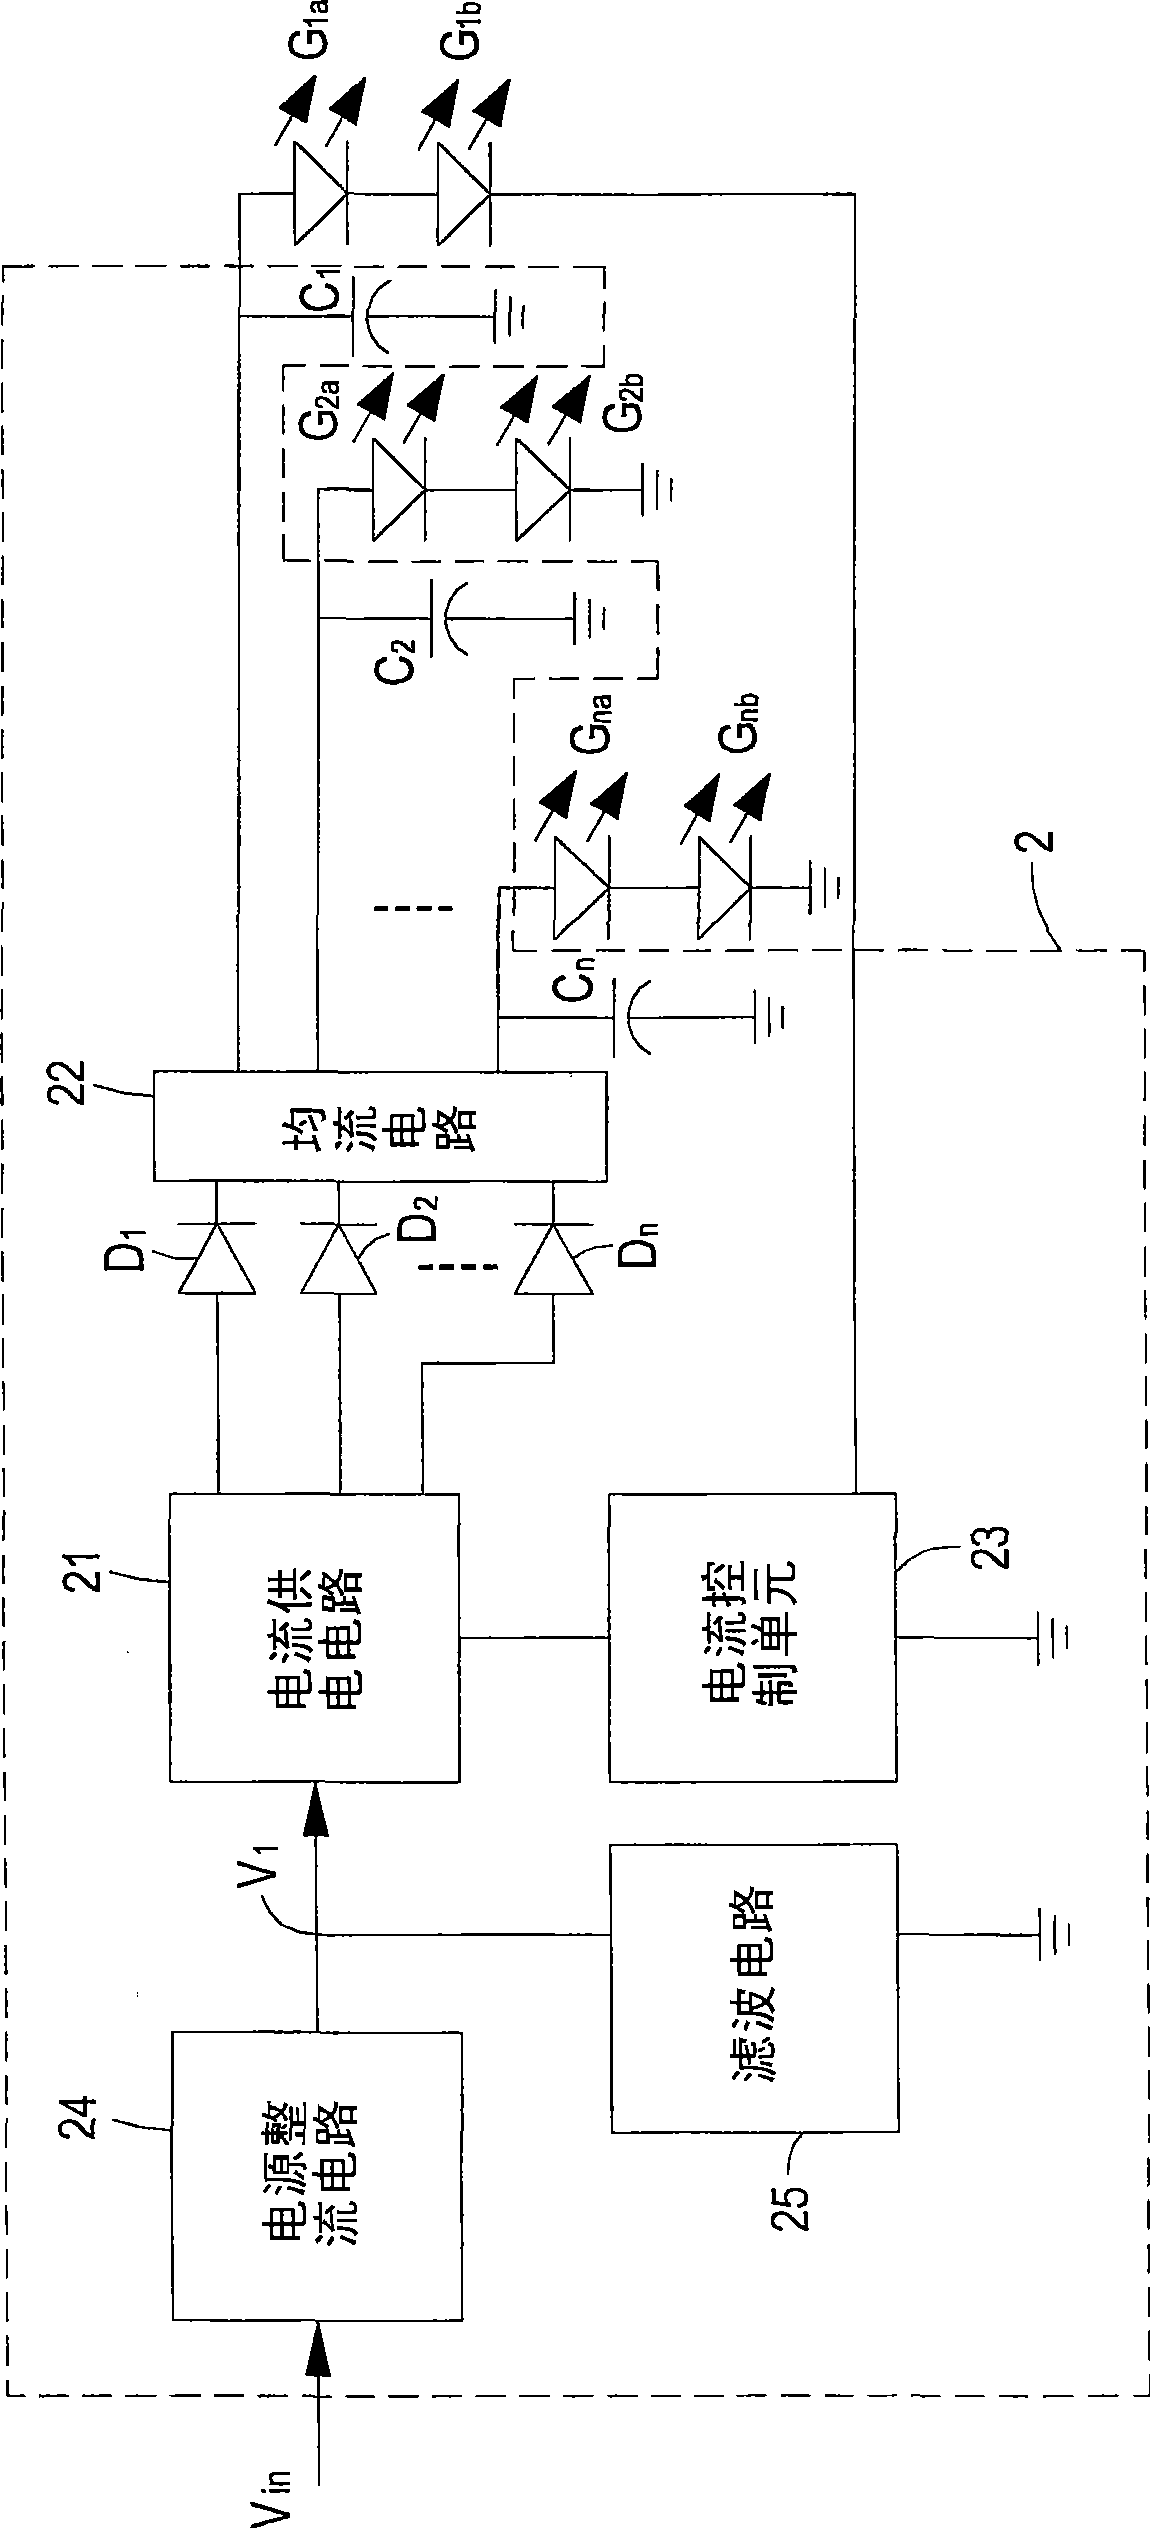 Current balance power supply circuit of multi-group light-emitting diode